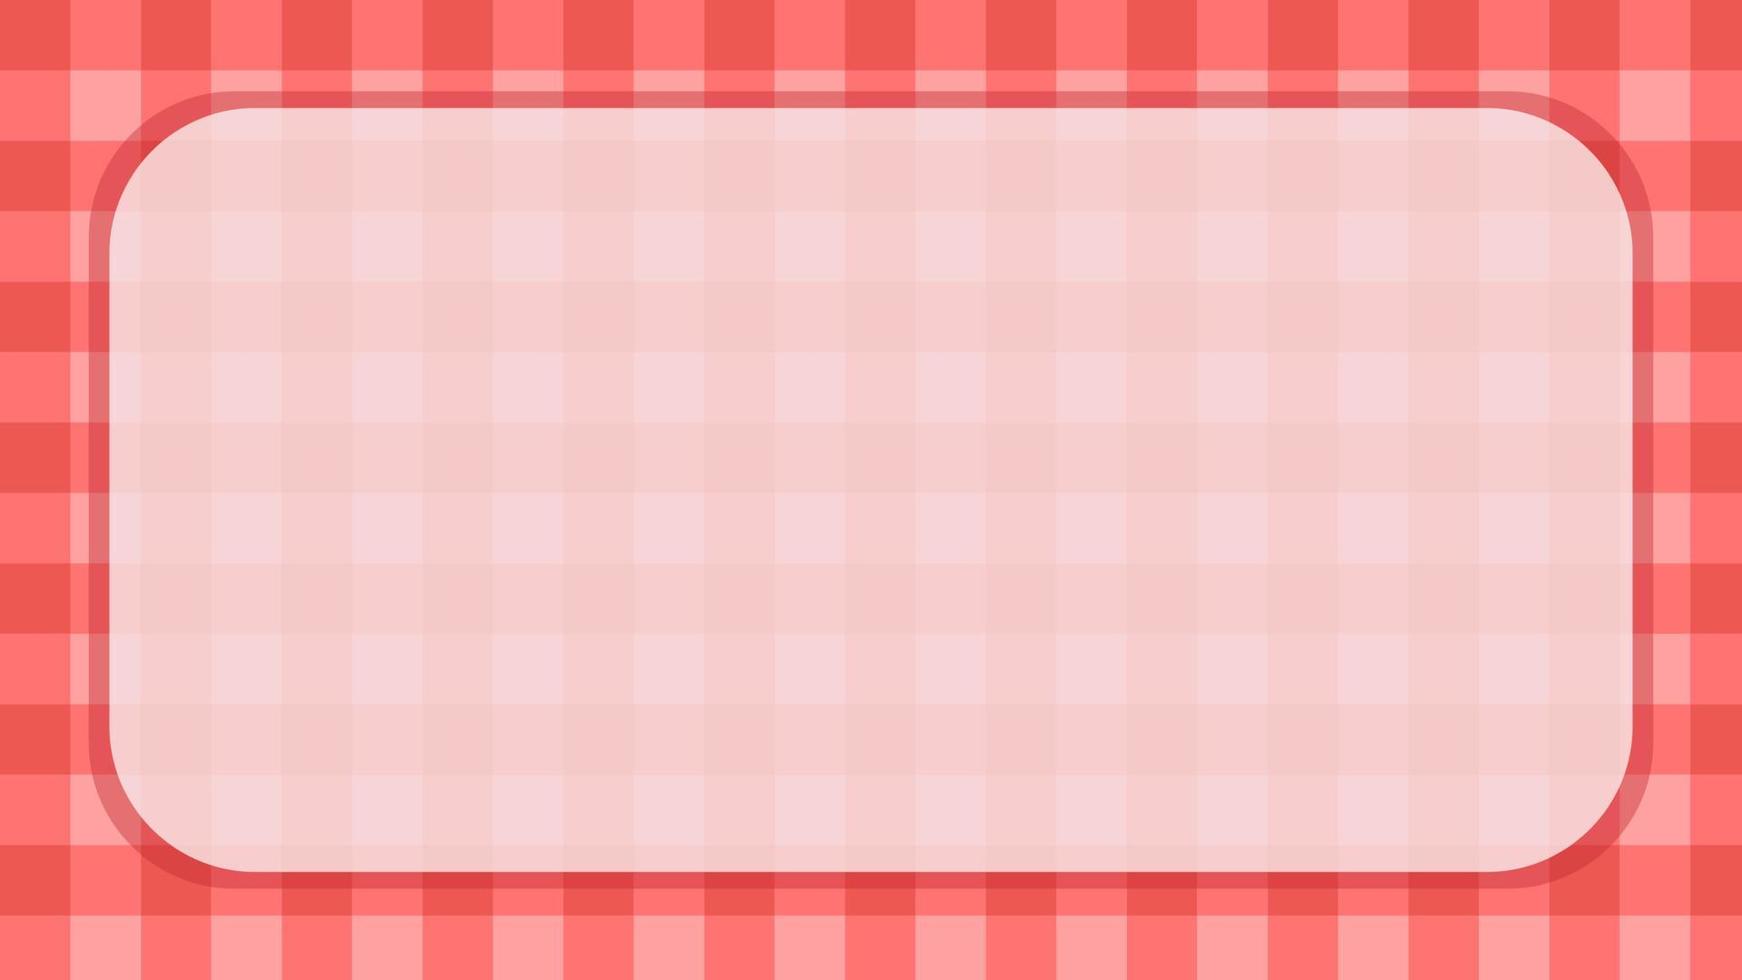 Aesthetic cute red gingham, checkers, checkerboard with text space backdrop illustration, perfect for wallpaper, backdrop, postcard, background, banner vector